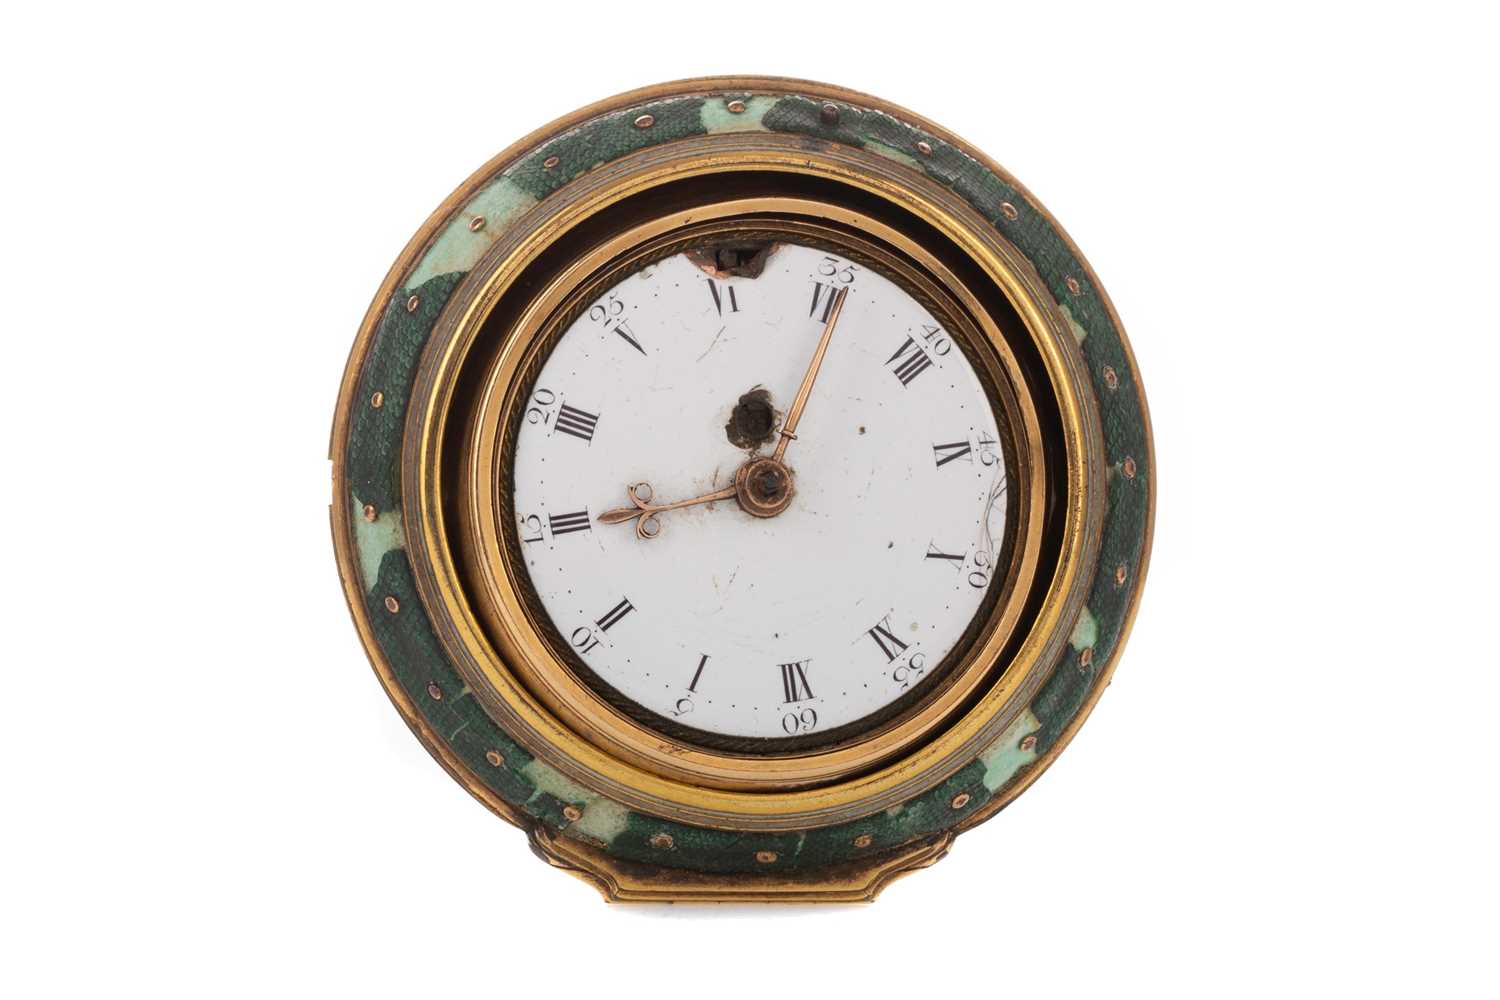 Lot 737 - A LATE 18TH CENTURY GOLD CASED POCKET WATCH